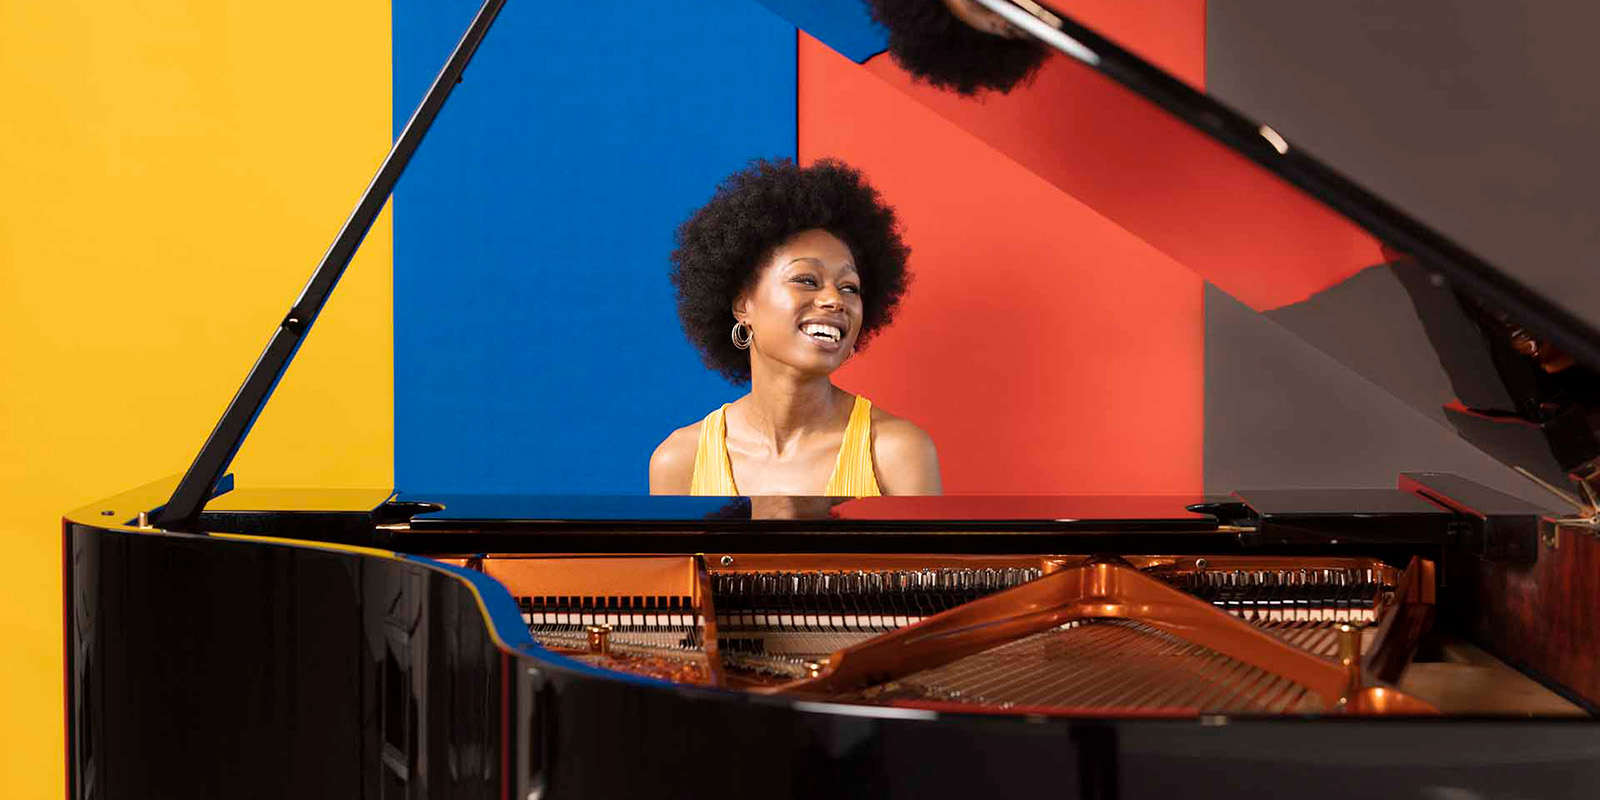 A woman sits at a black grand piano in front of a colorful striped wall.